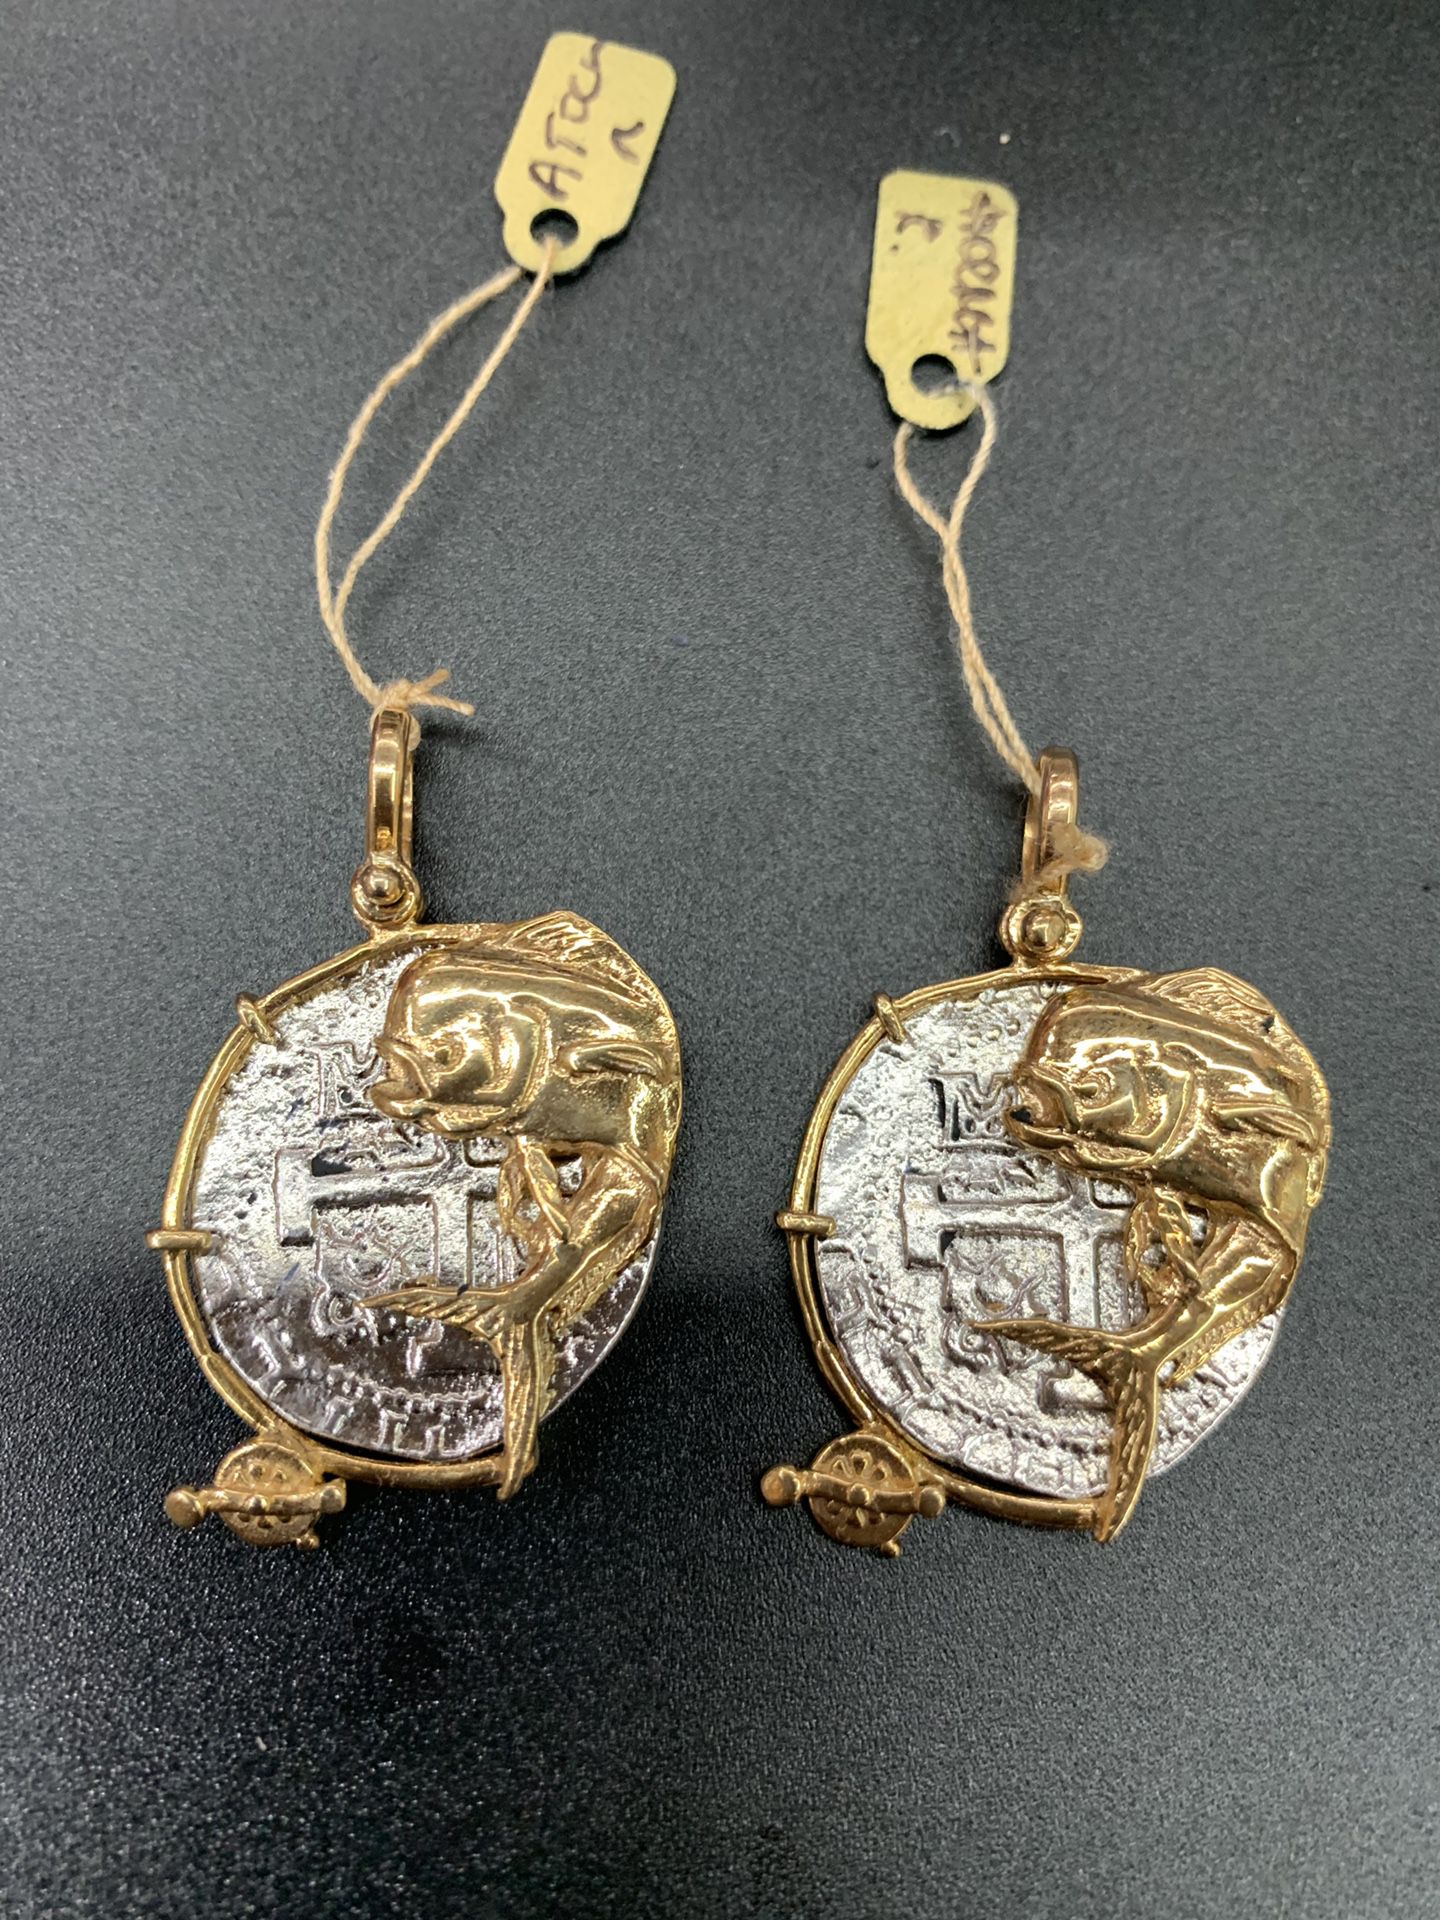 BIG SALE Two Atocha coin pendants in gold bezel